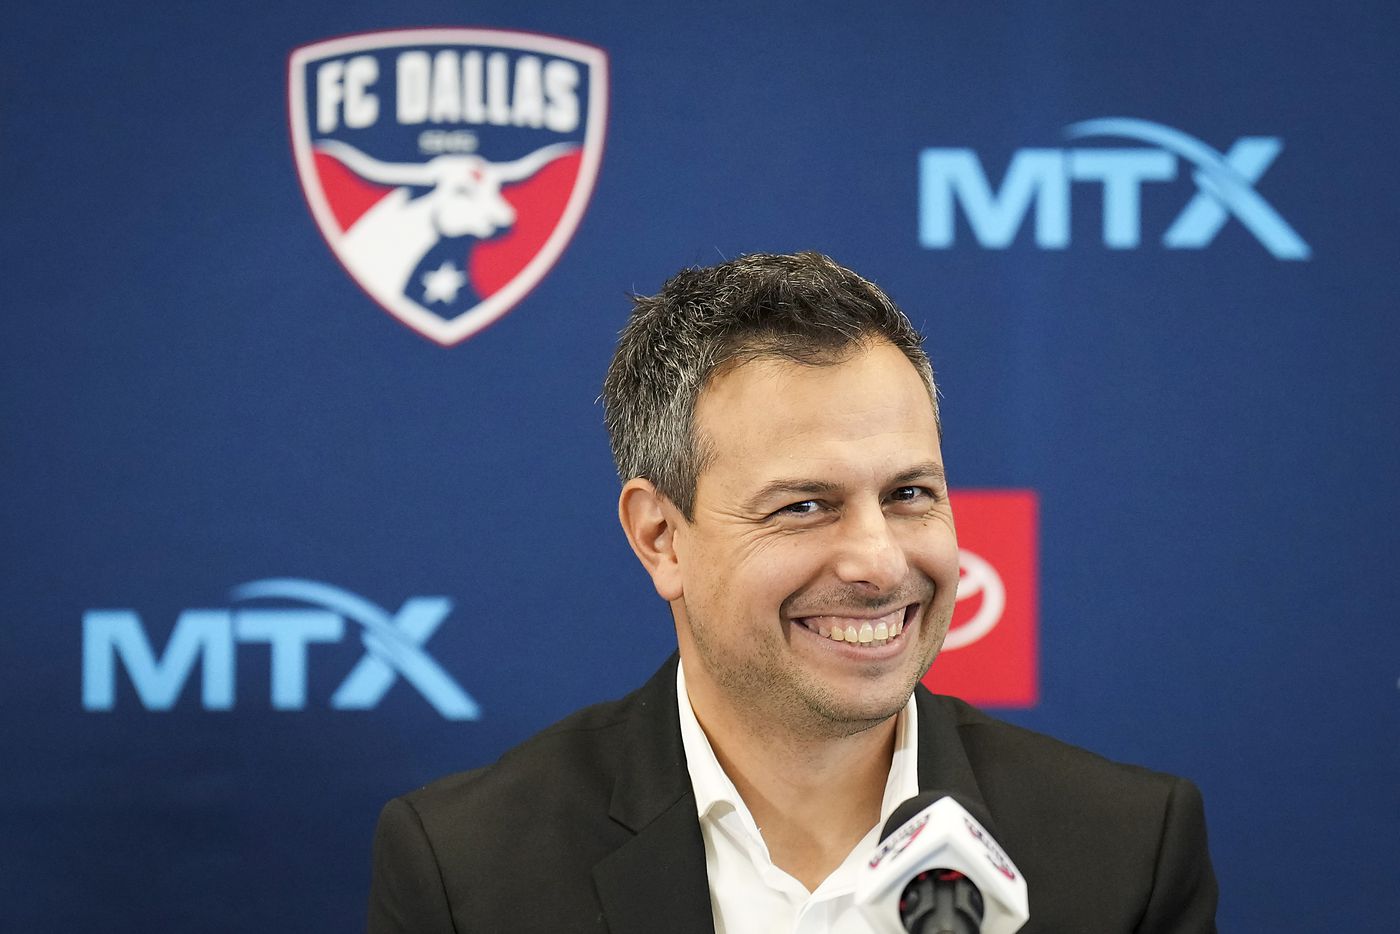 New FC Dallas head coach Nico Estévez smiles during his introductory press conference at the National Soccer Hall of Fame on Friday, Dec. 3, 2021, in Frisco, Texas.